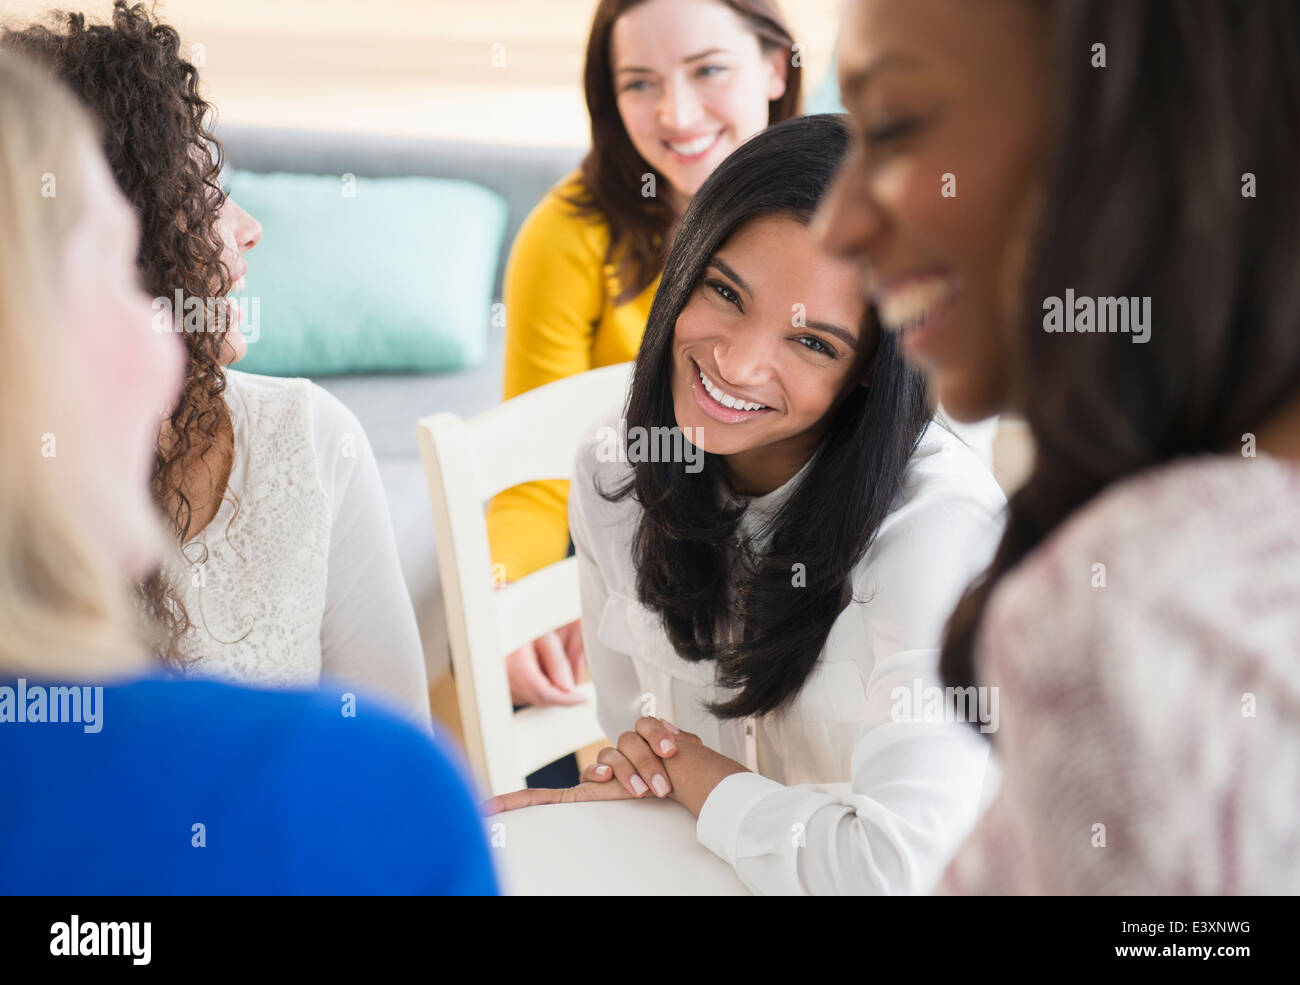 Women relaxing together in living room Stock Photo